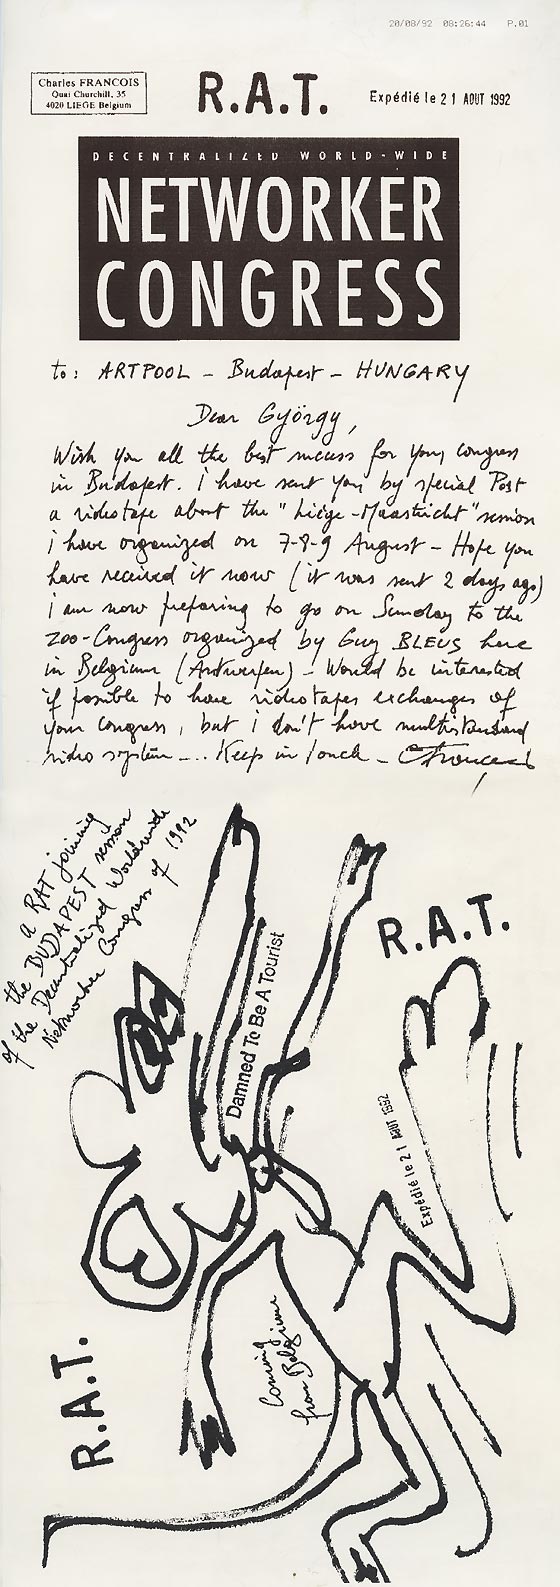 Fax by Charles Francois for Artpool’s Faxzine, 1992.